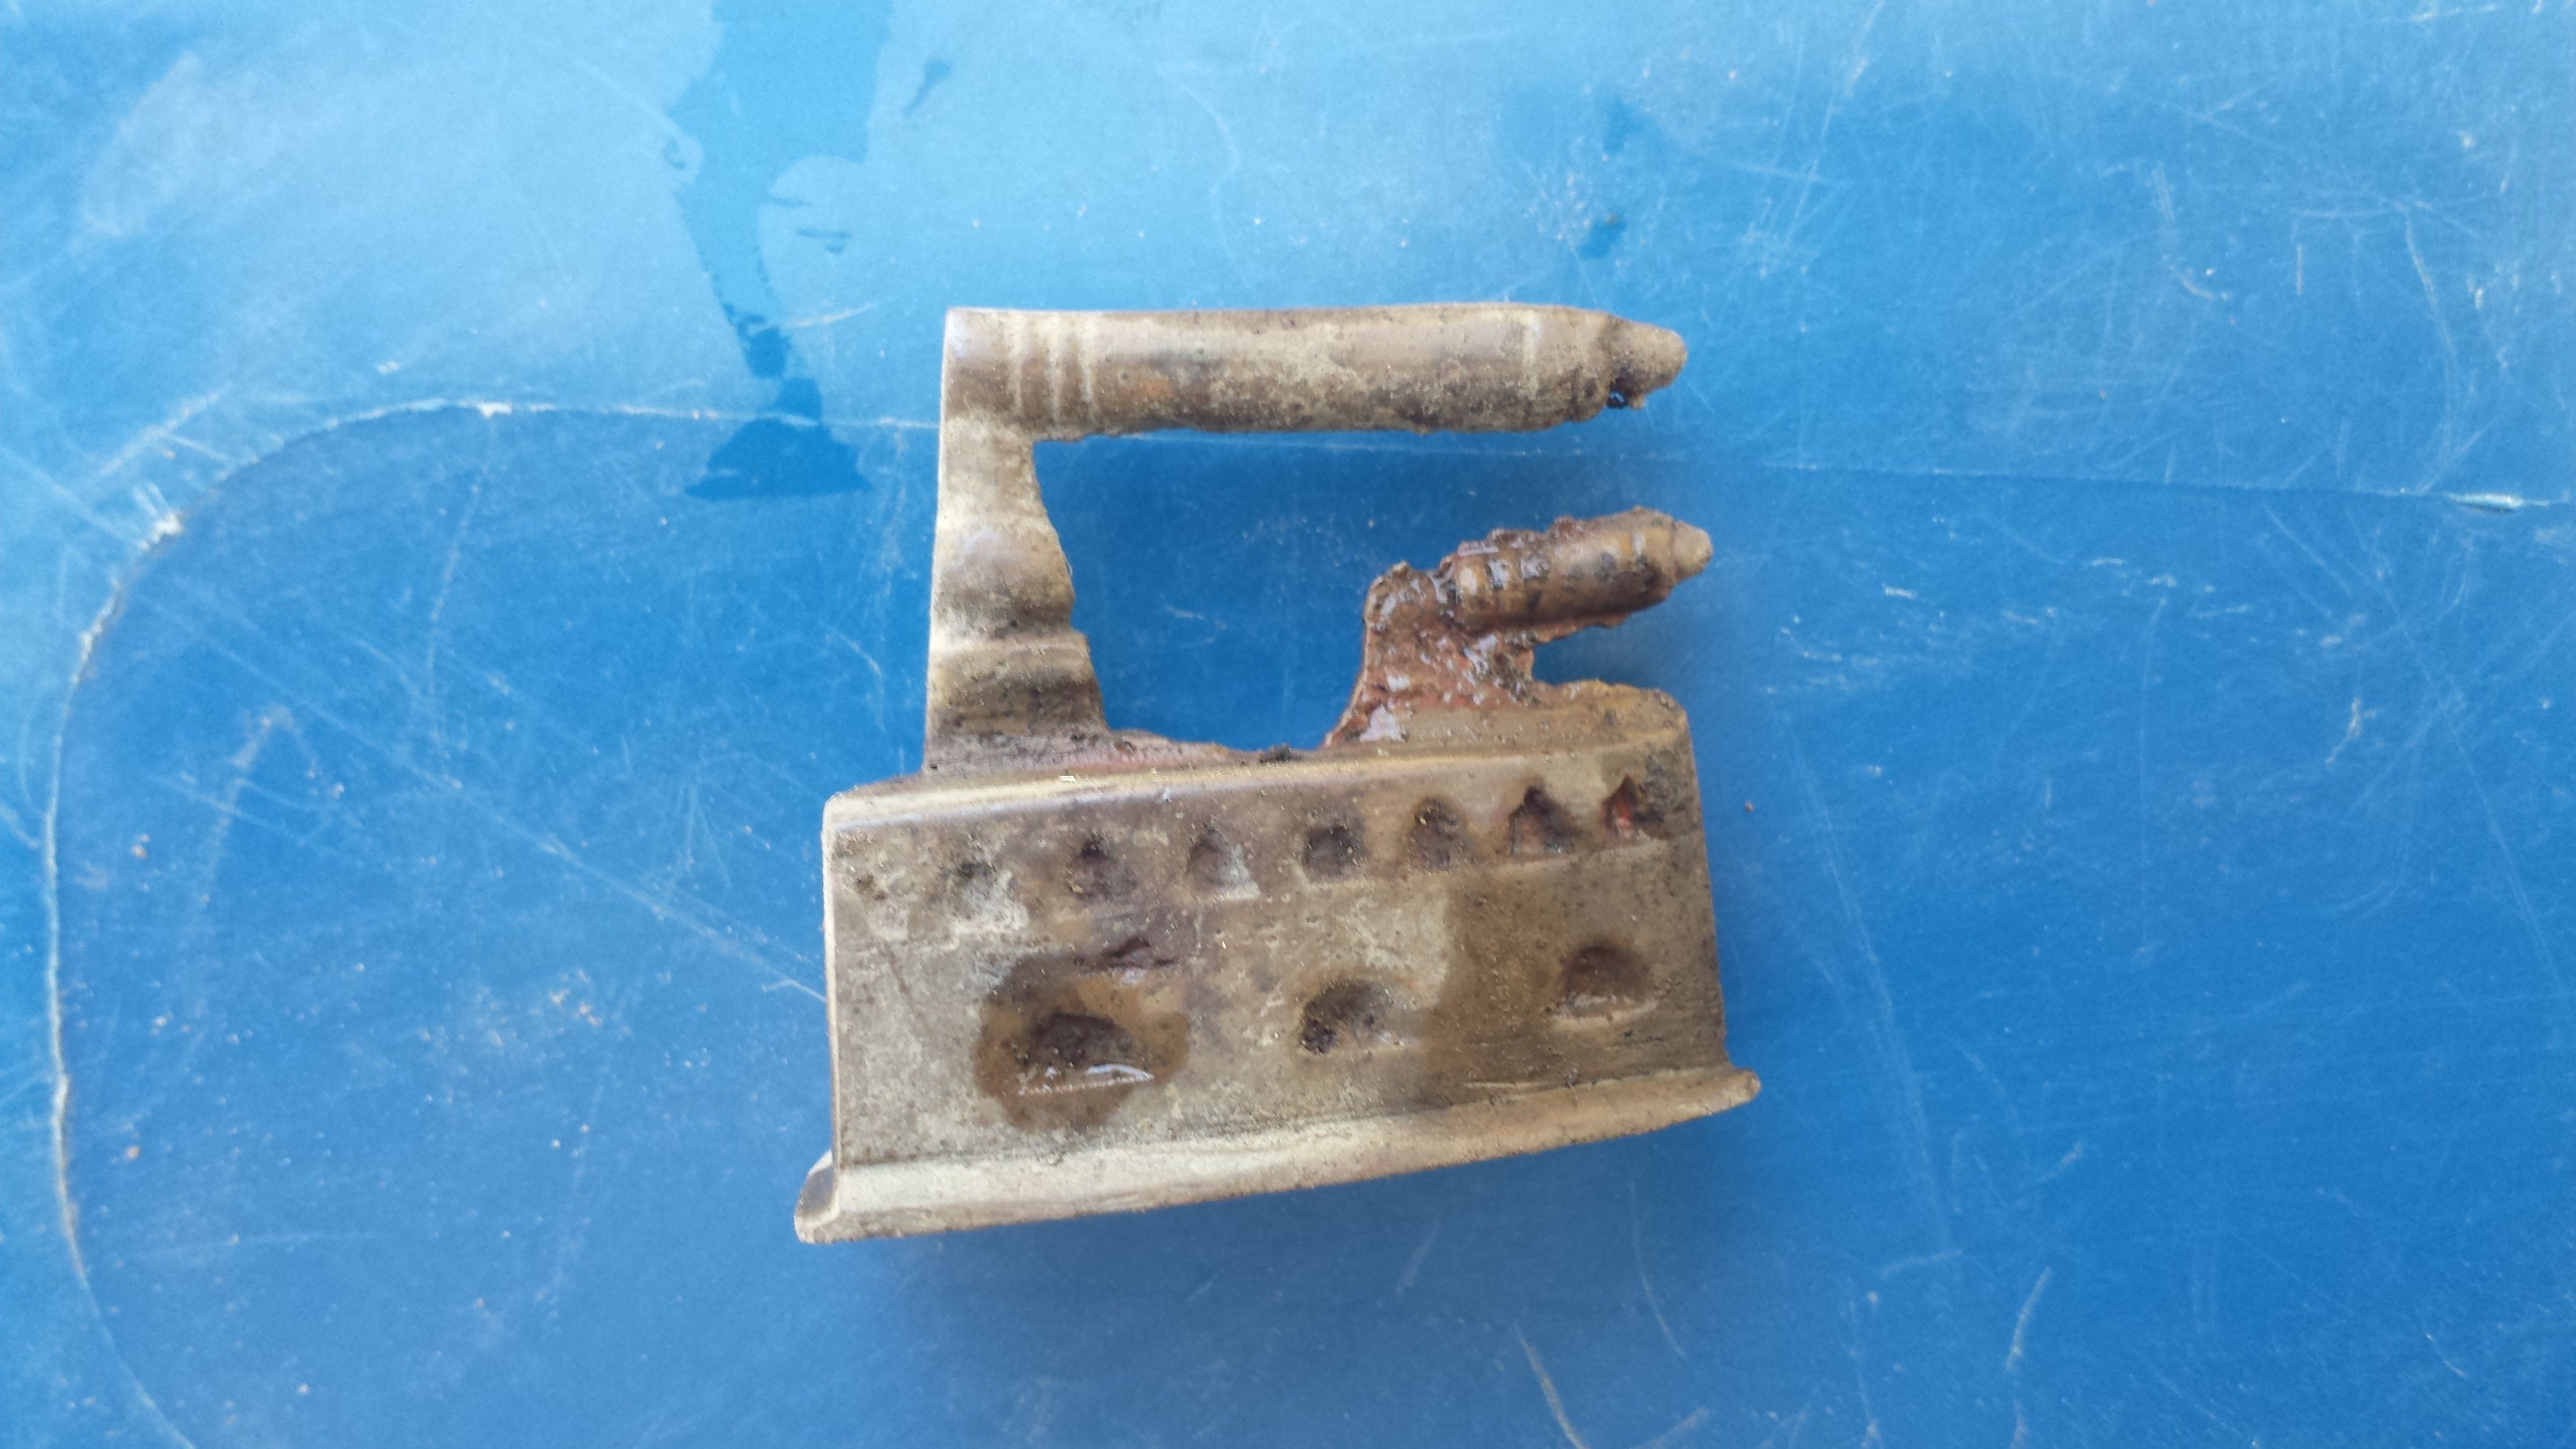 20150411 164057  Oberlin Notable 1.5 Hr

Bronze miniature Iron, from the 50's or earlier